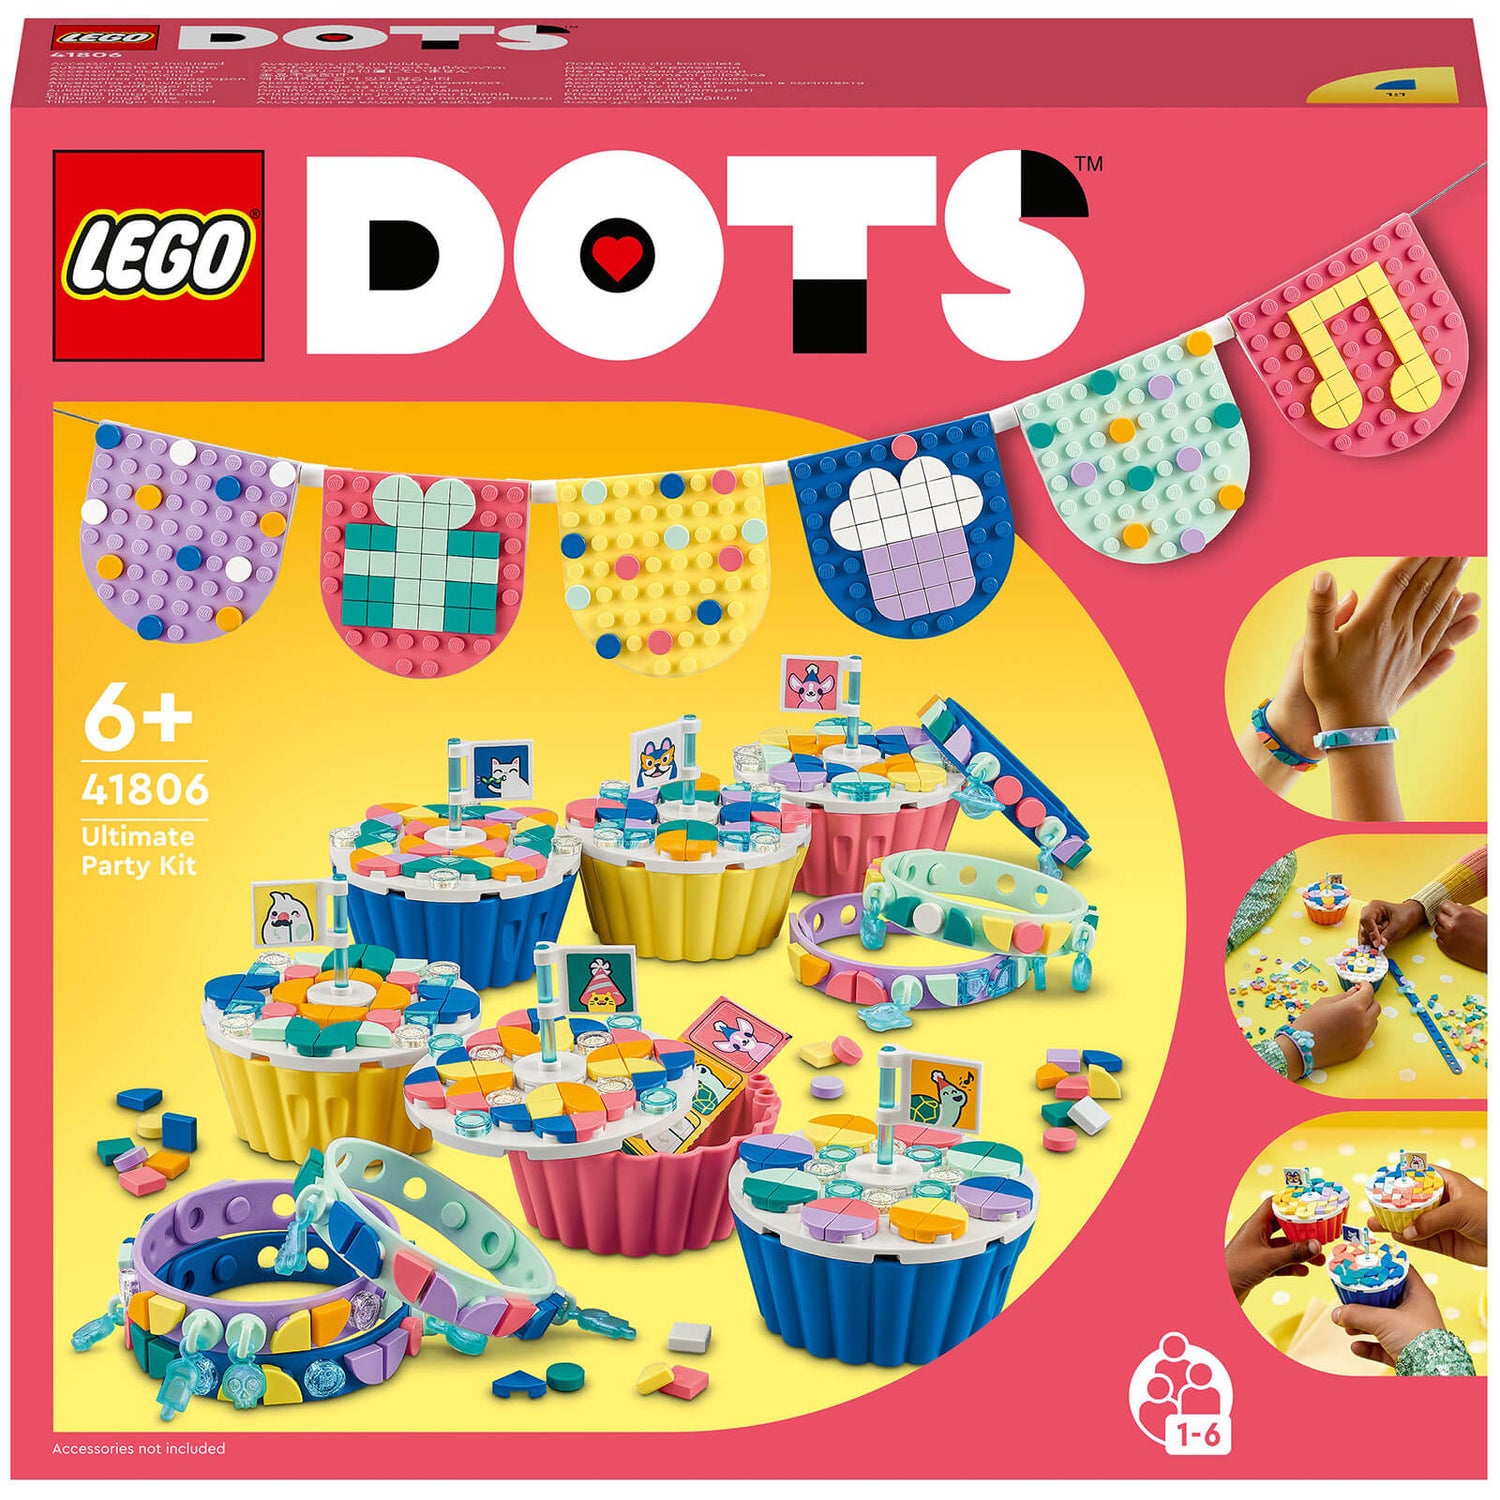 LEGO DOTS: Ultimate Party Kit Birthday Cupcake Crafts (41806)